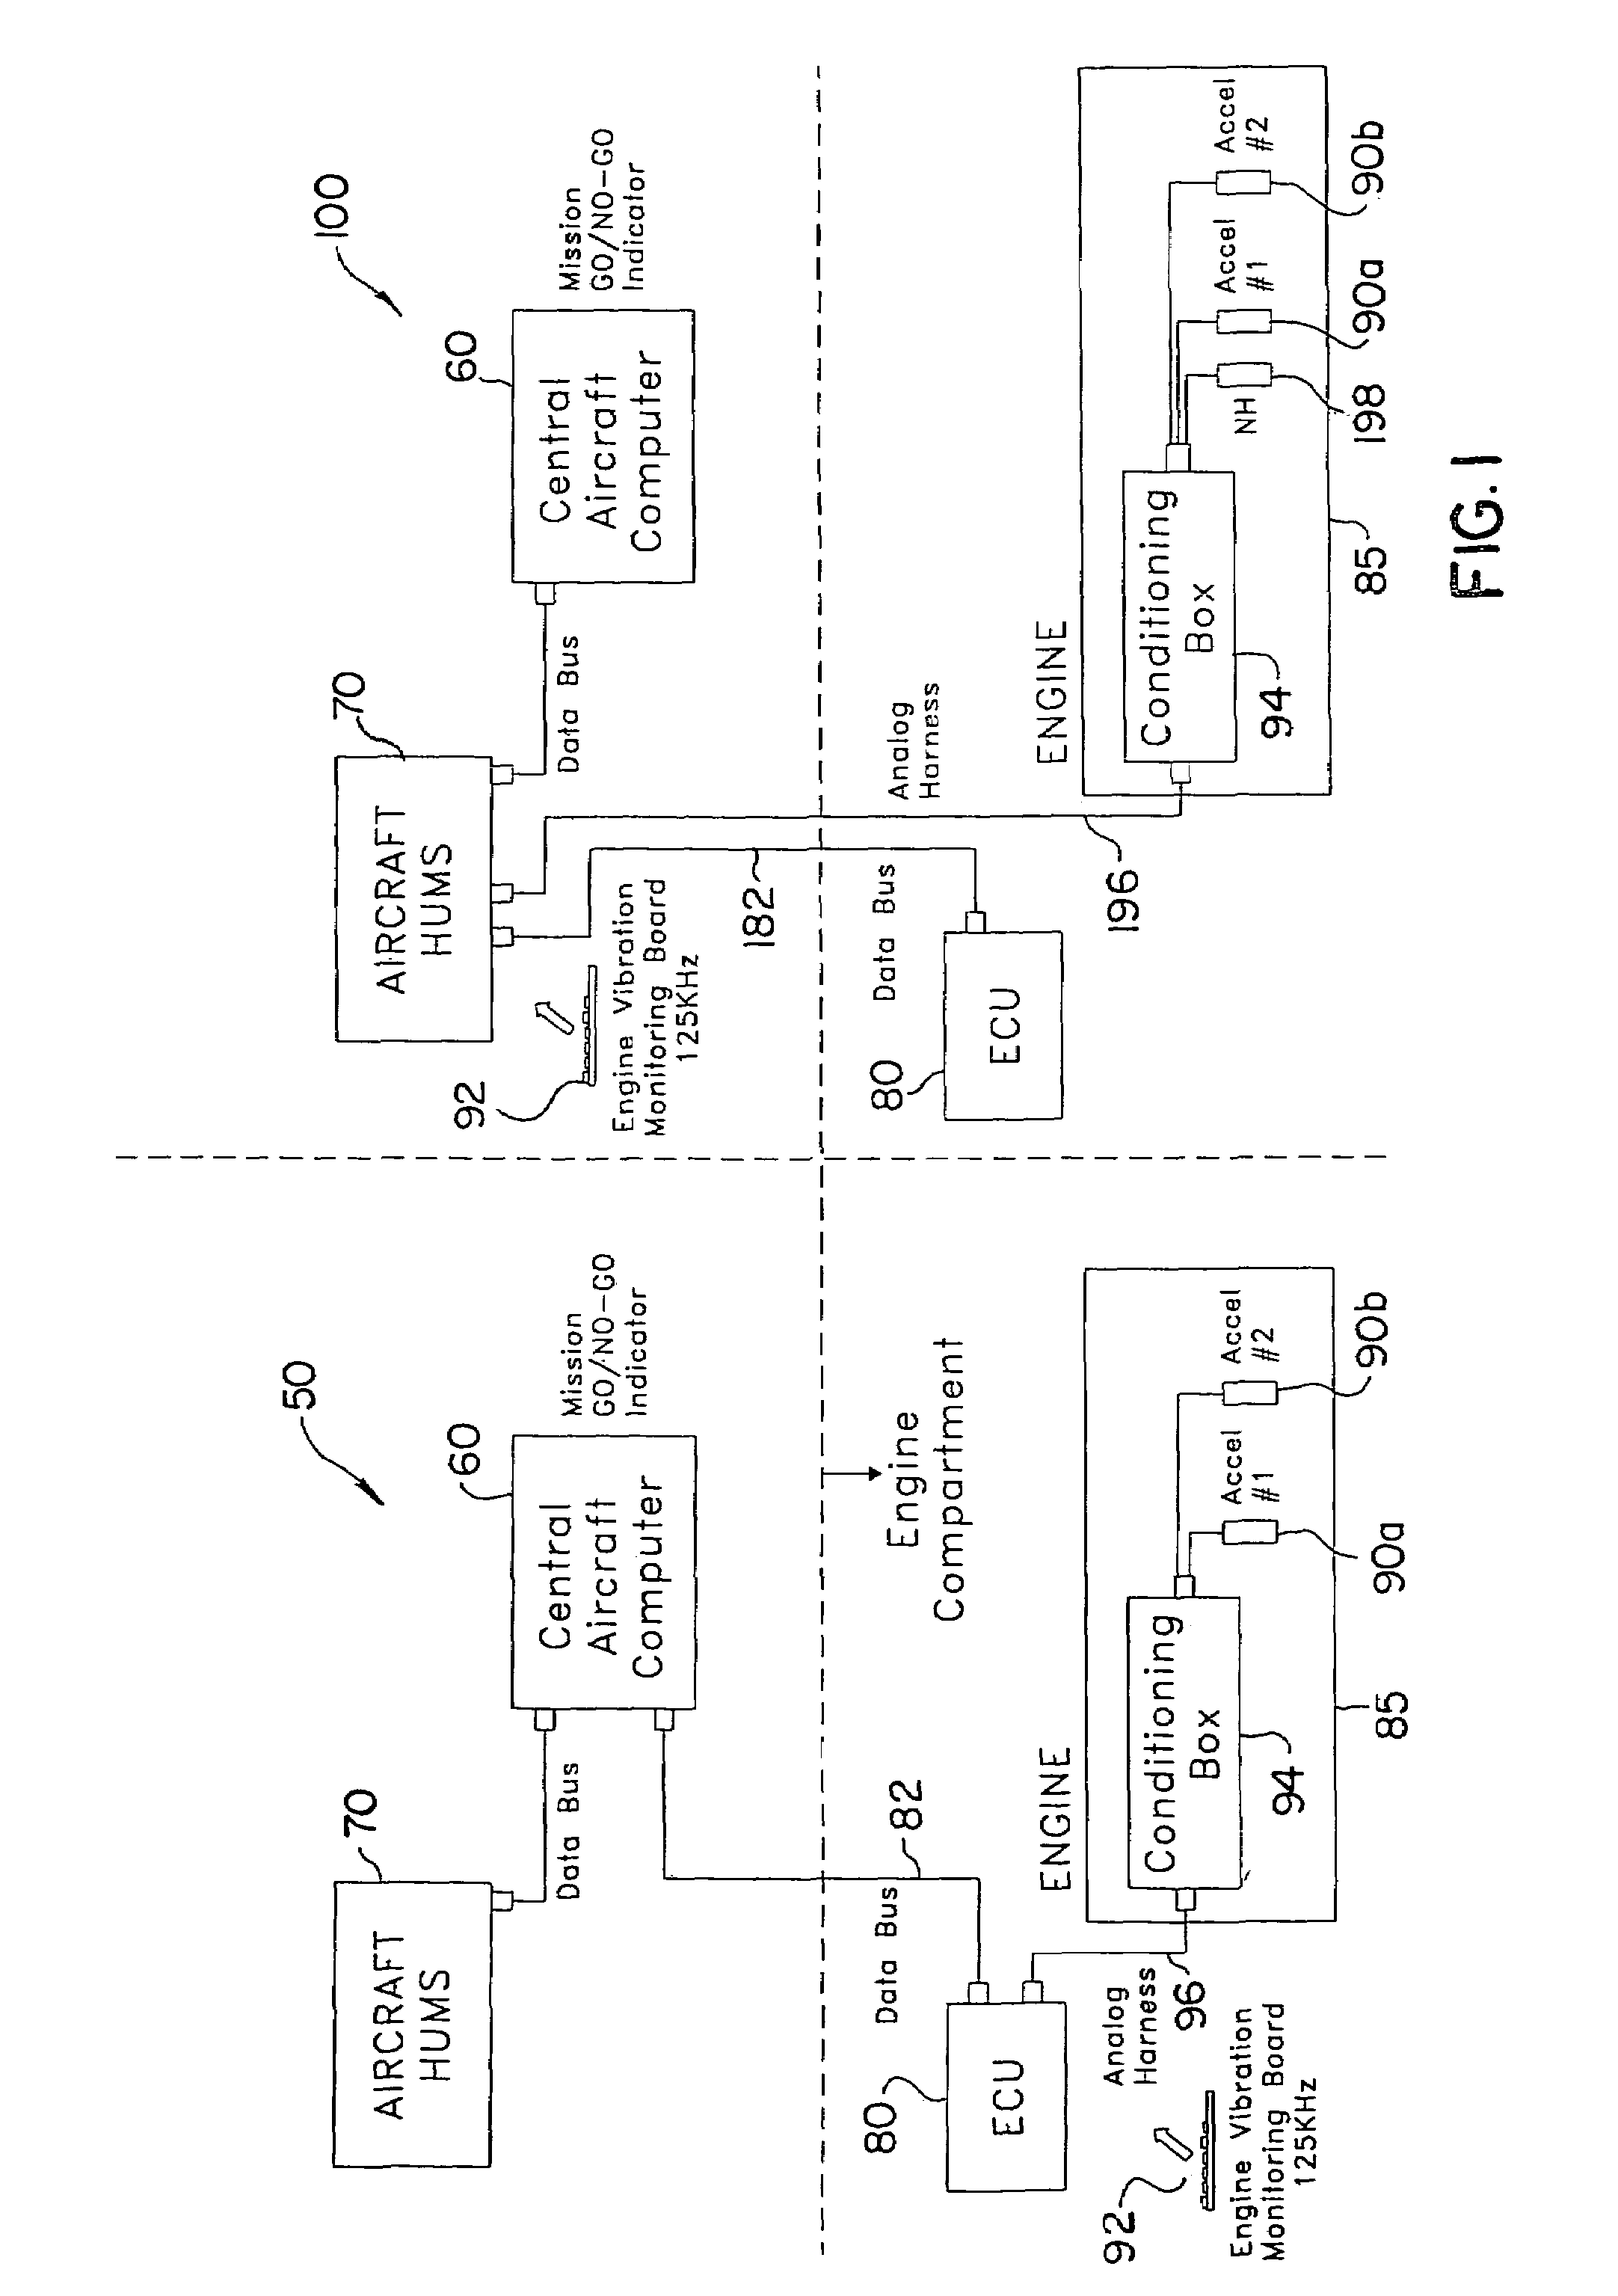 Vibration monitoring system for gas turbine engines